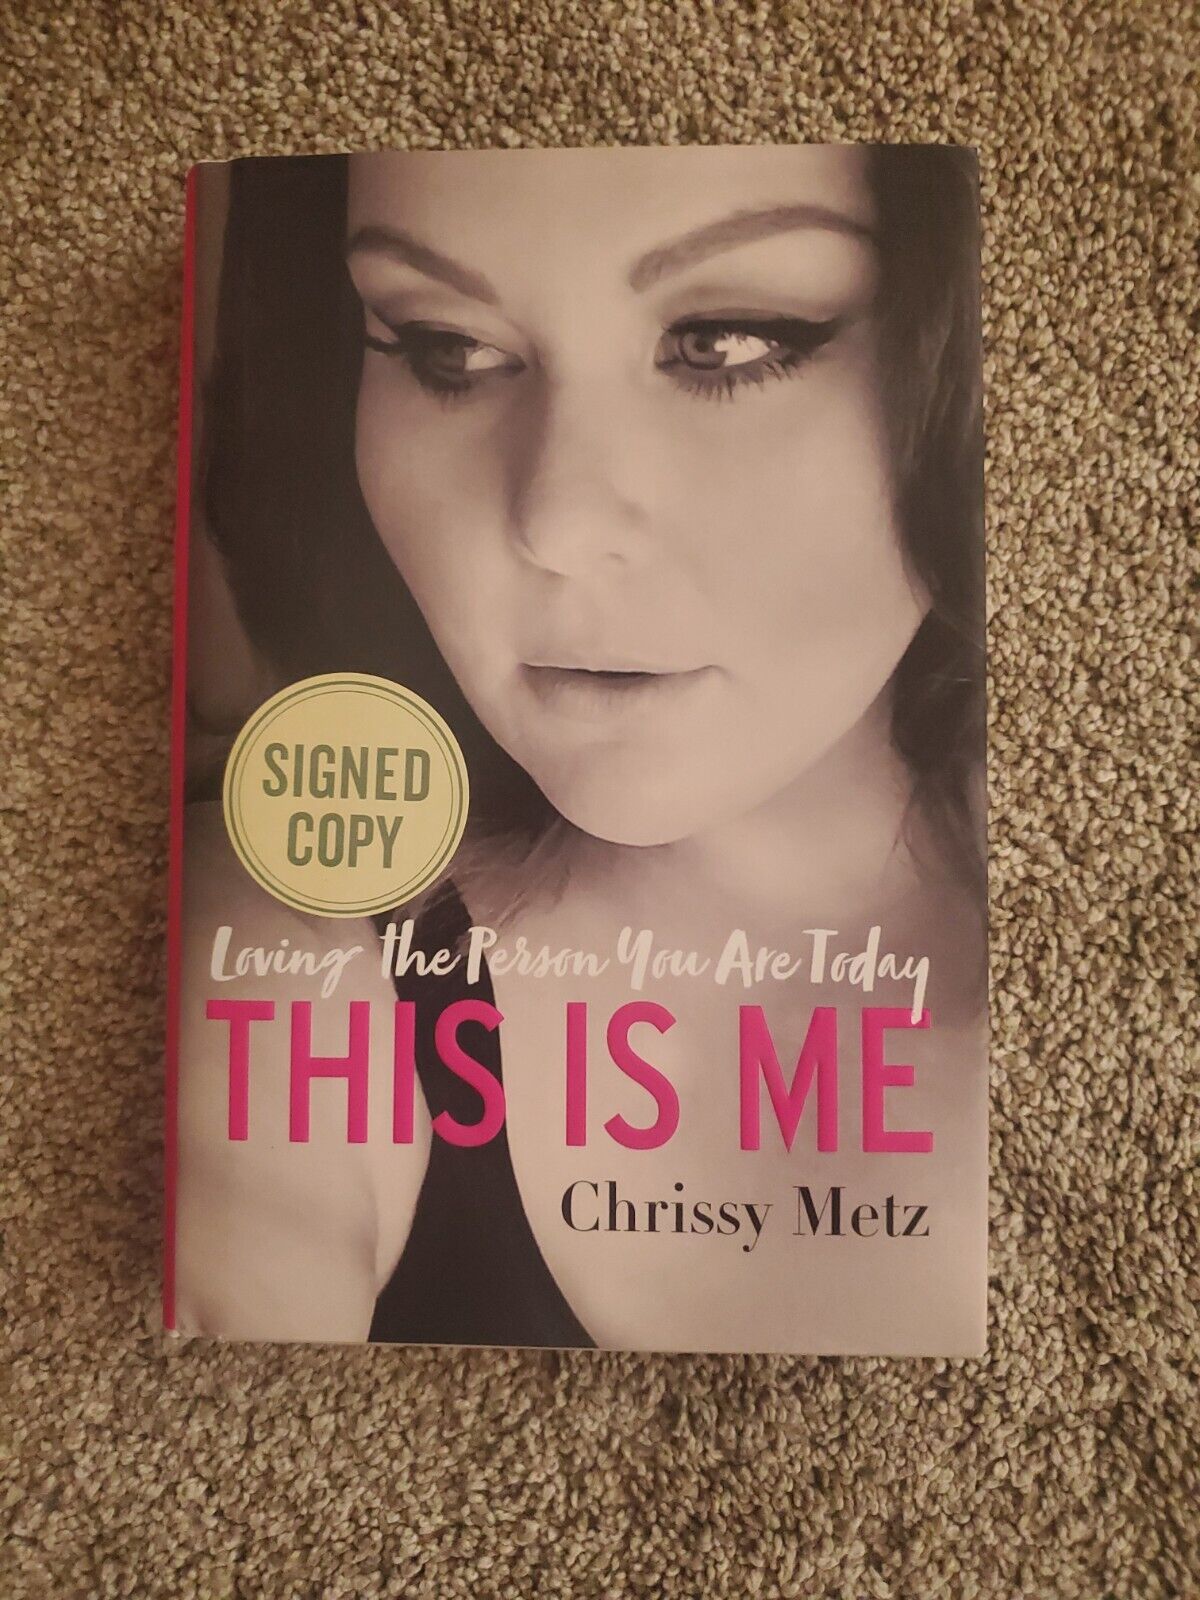 2018 CHRISSY METZ SIGNED BOOK \'This Is Me HC DJ First Edition 1st 1st THIS IS US